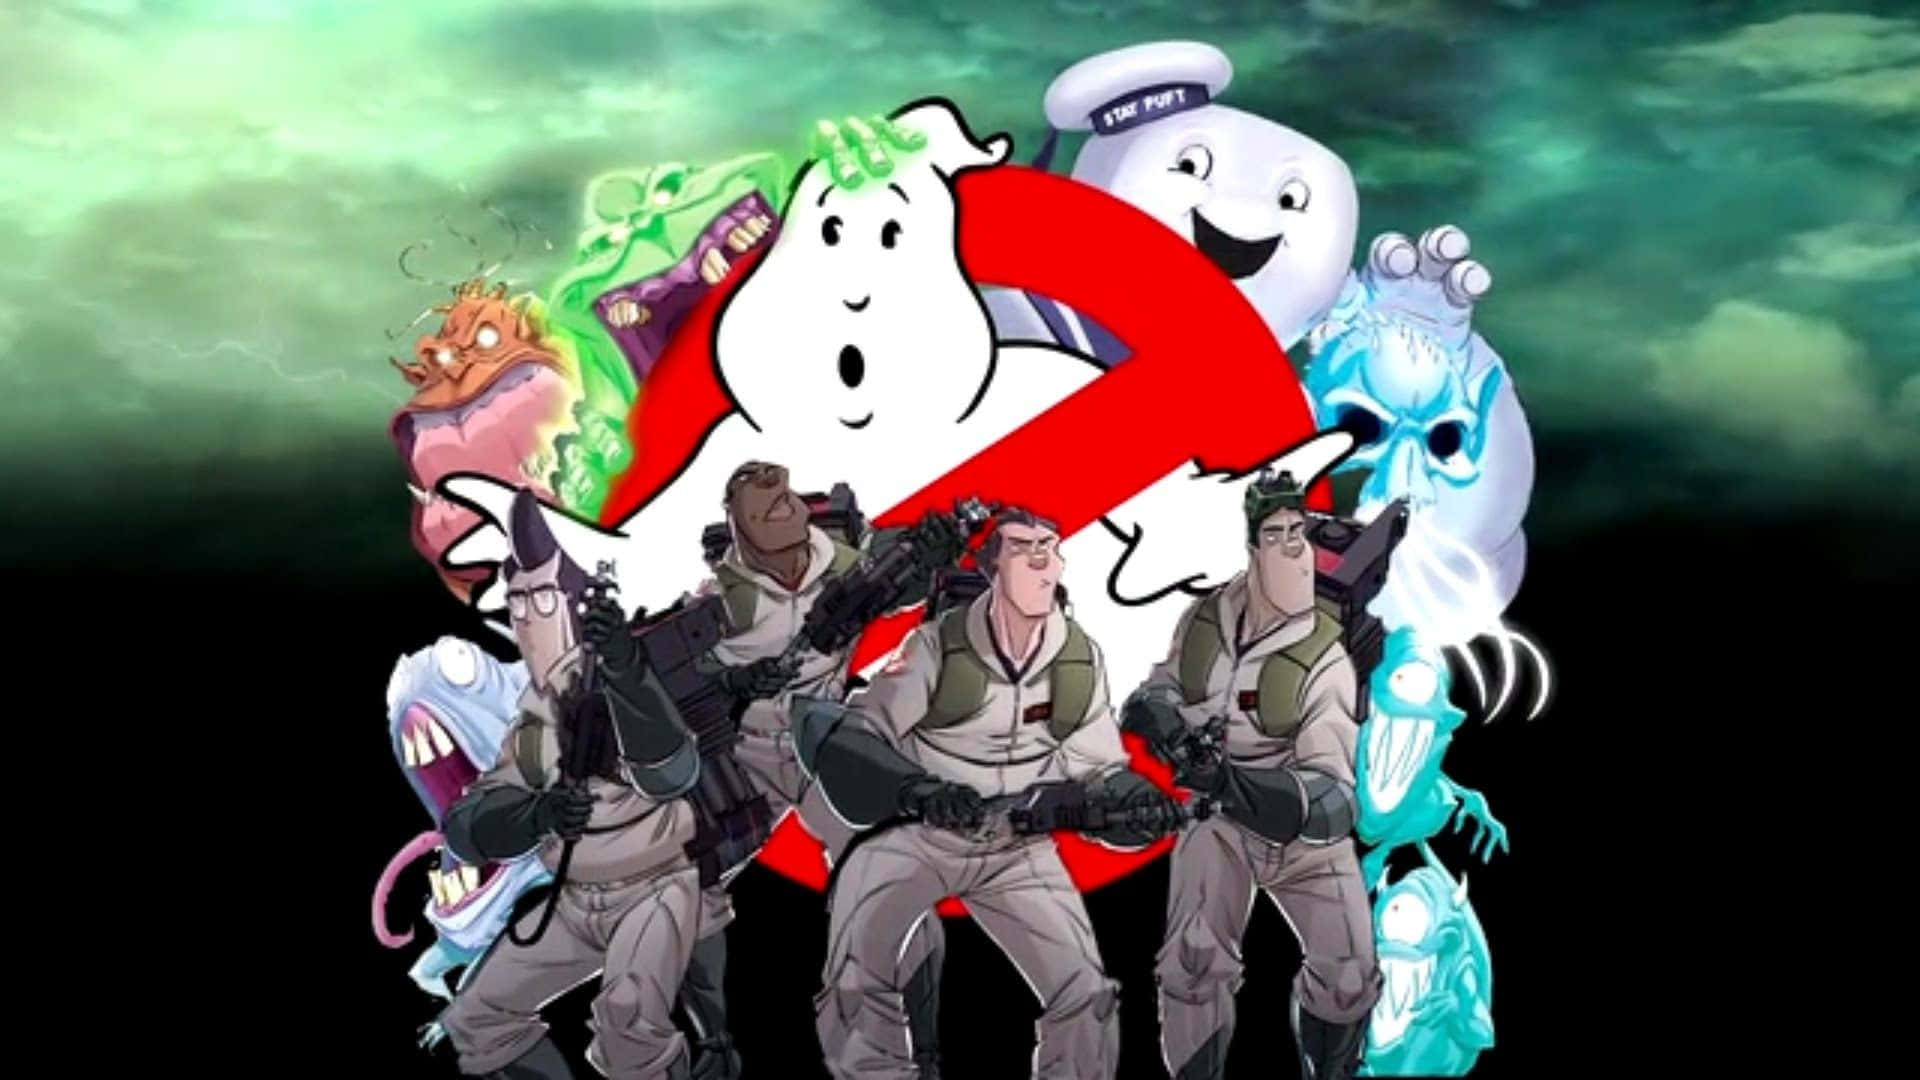 Get ready to bust some ghosts with the Original Ghostbusters!